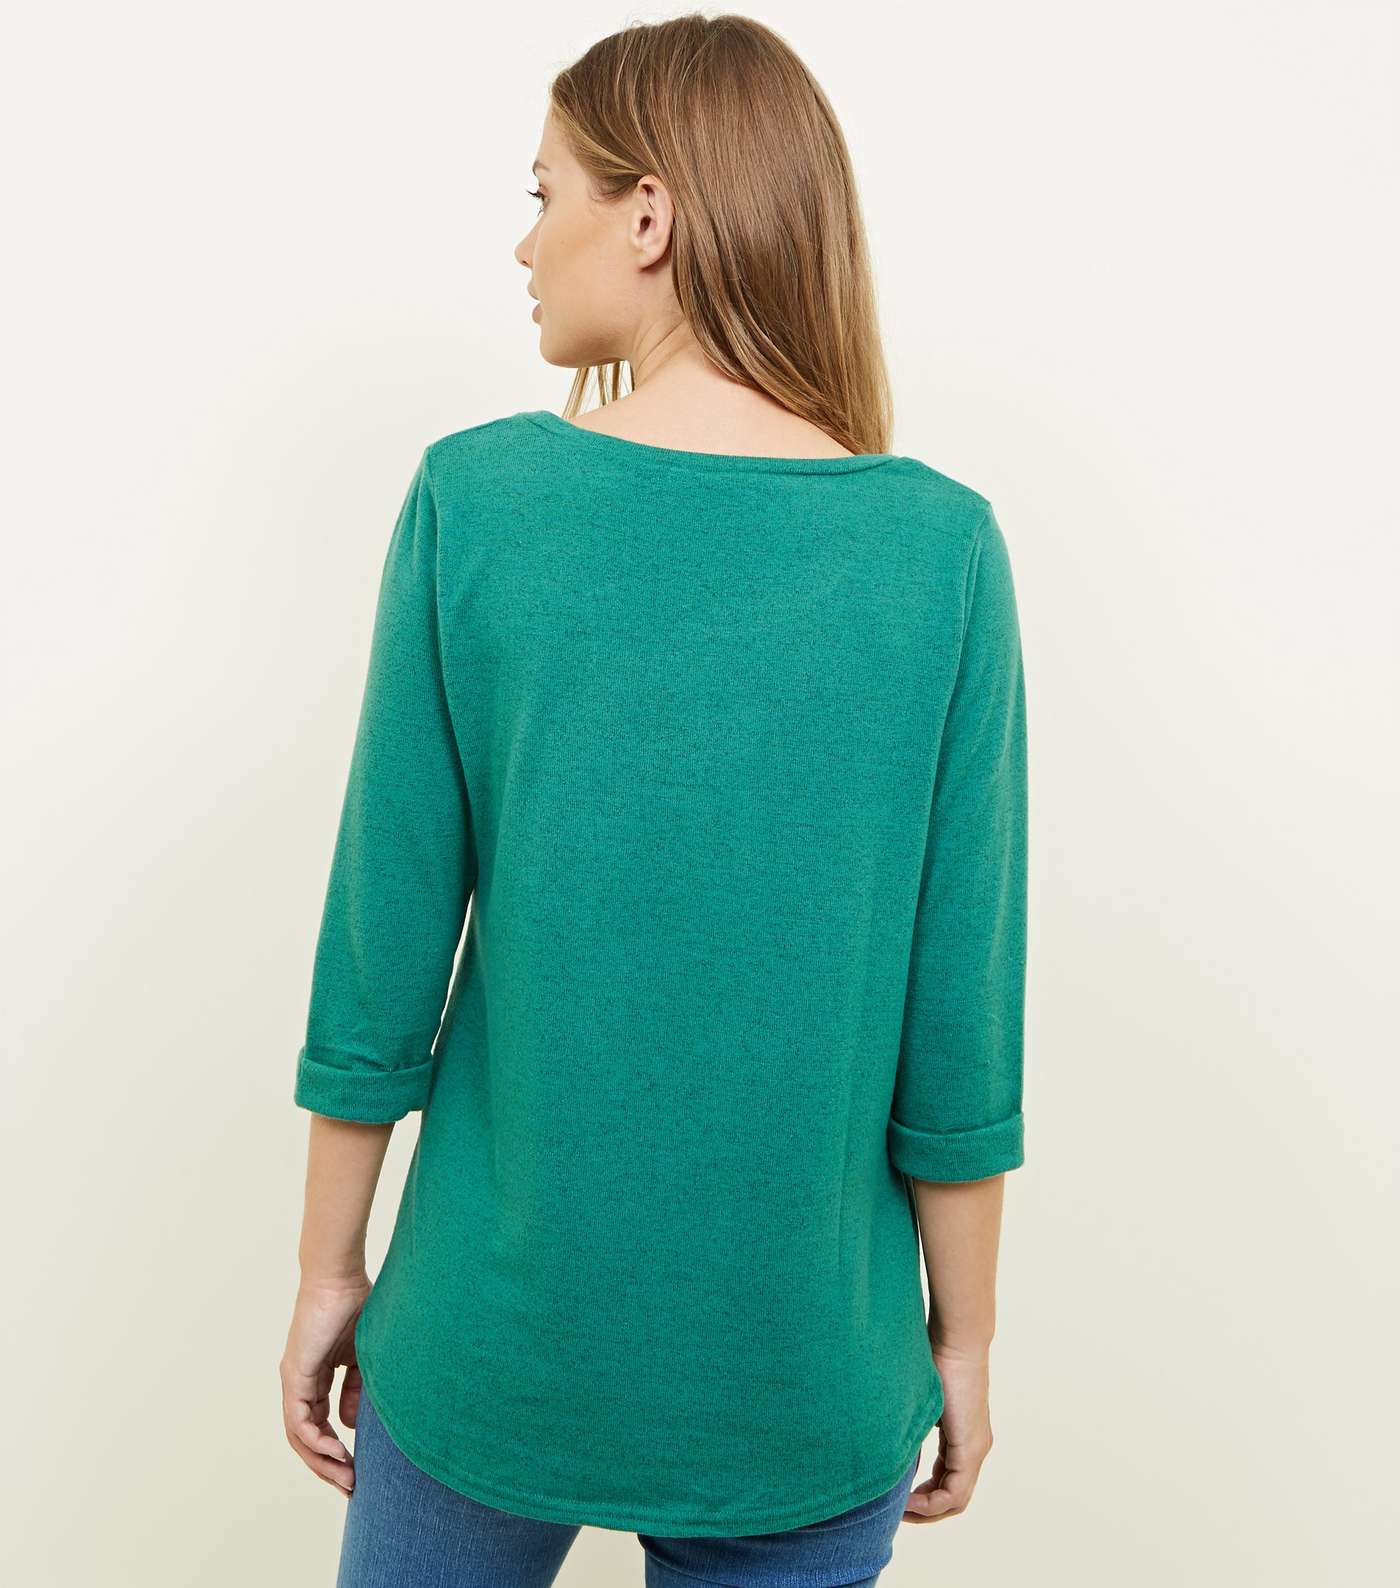 Green 3/4 Sleeve Fine Knit Top Image 3